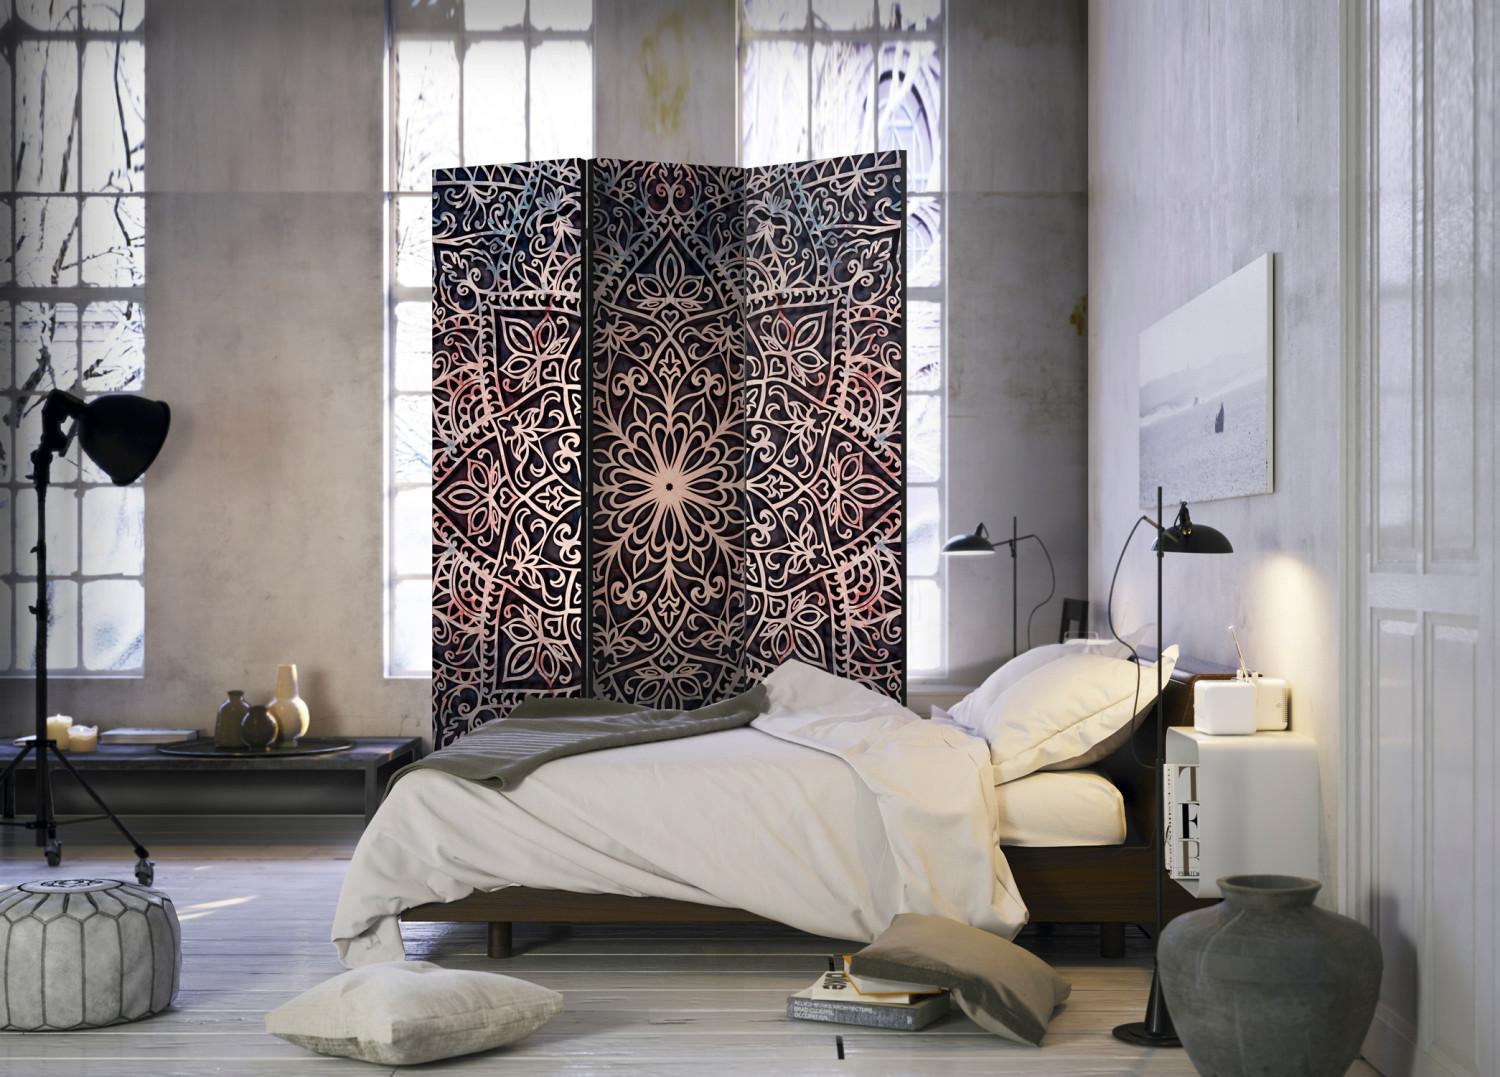 Biombo Spiritual Finely [Room Dividers]